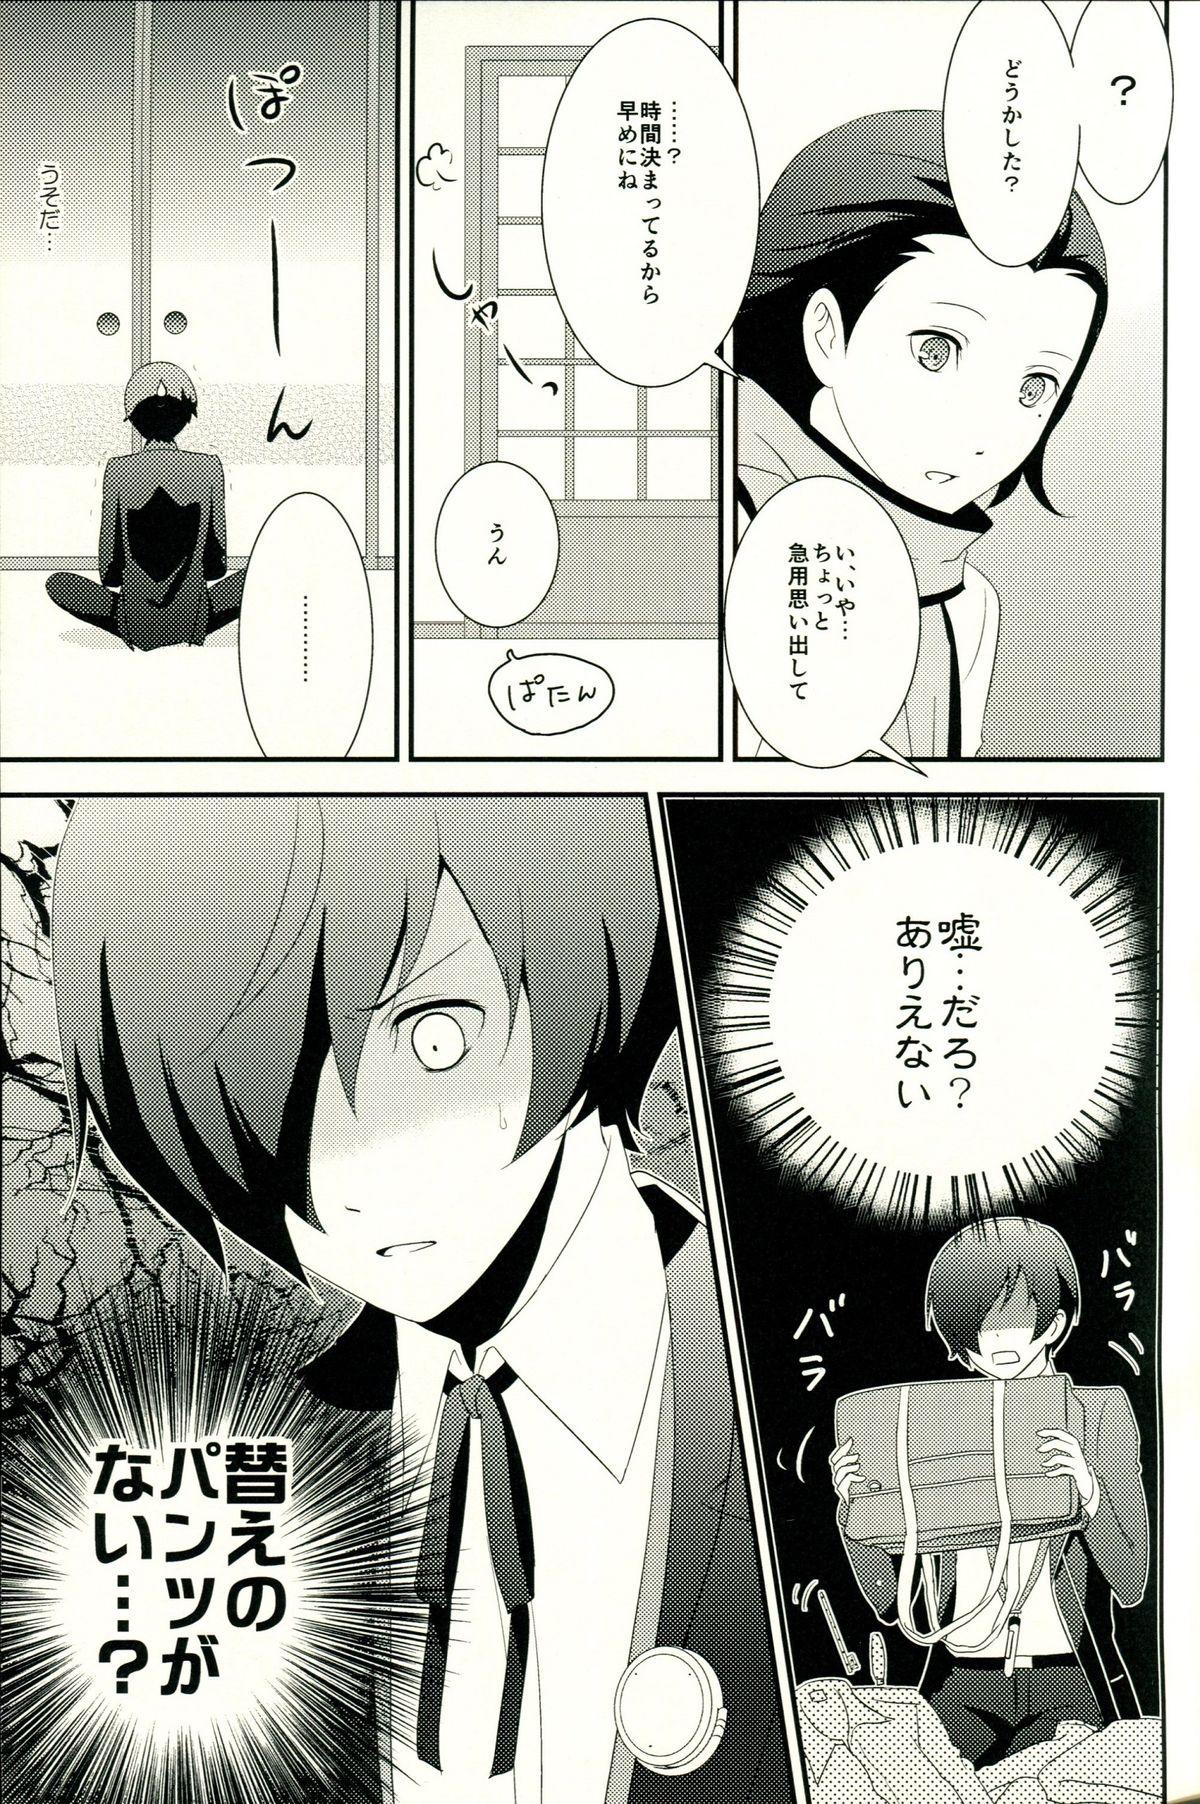 Trimmed Look for ×××…? - Persona 3 Punjabi - Page 10